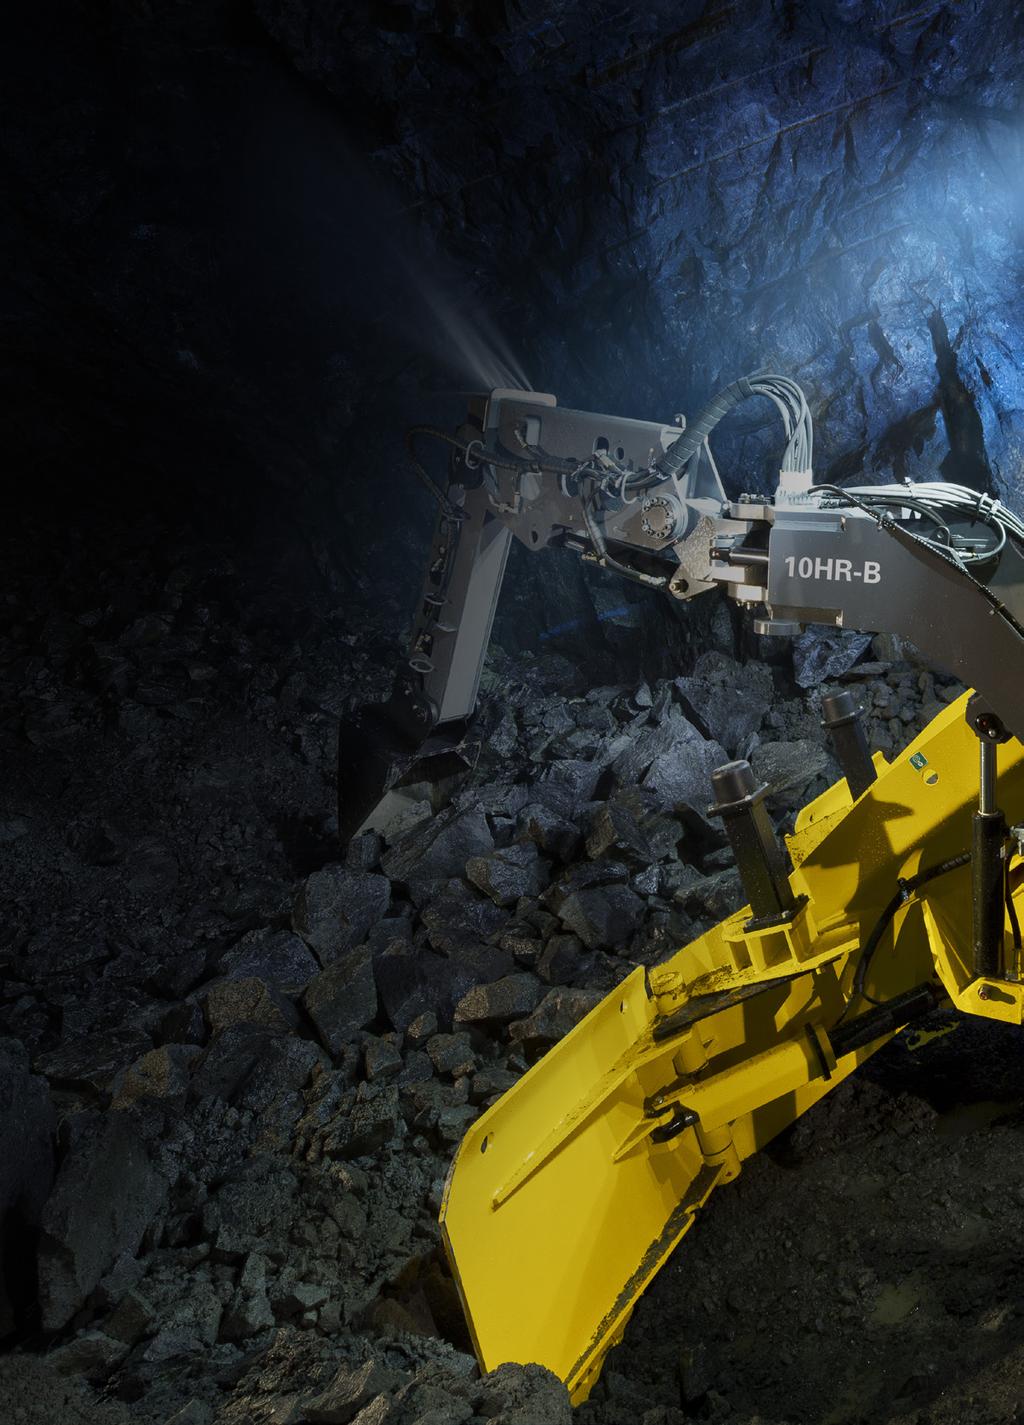 The Häggloader concept To drive long tunnels cost-effectively, you need high capacity equipment designed to operate efficiently in narrow or confined spaces.